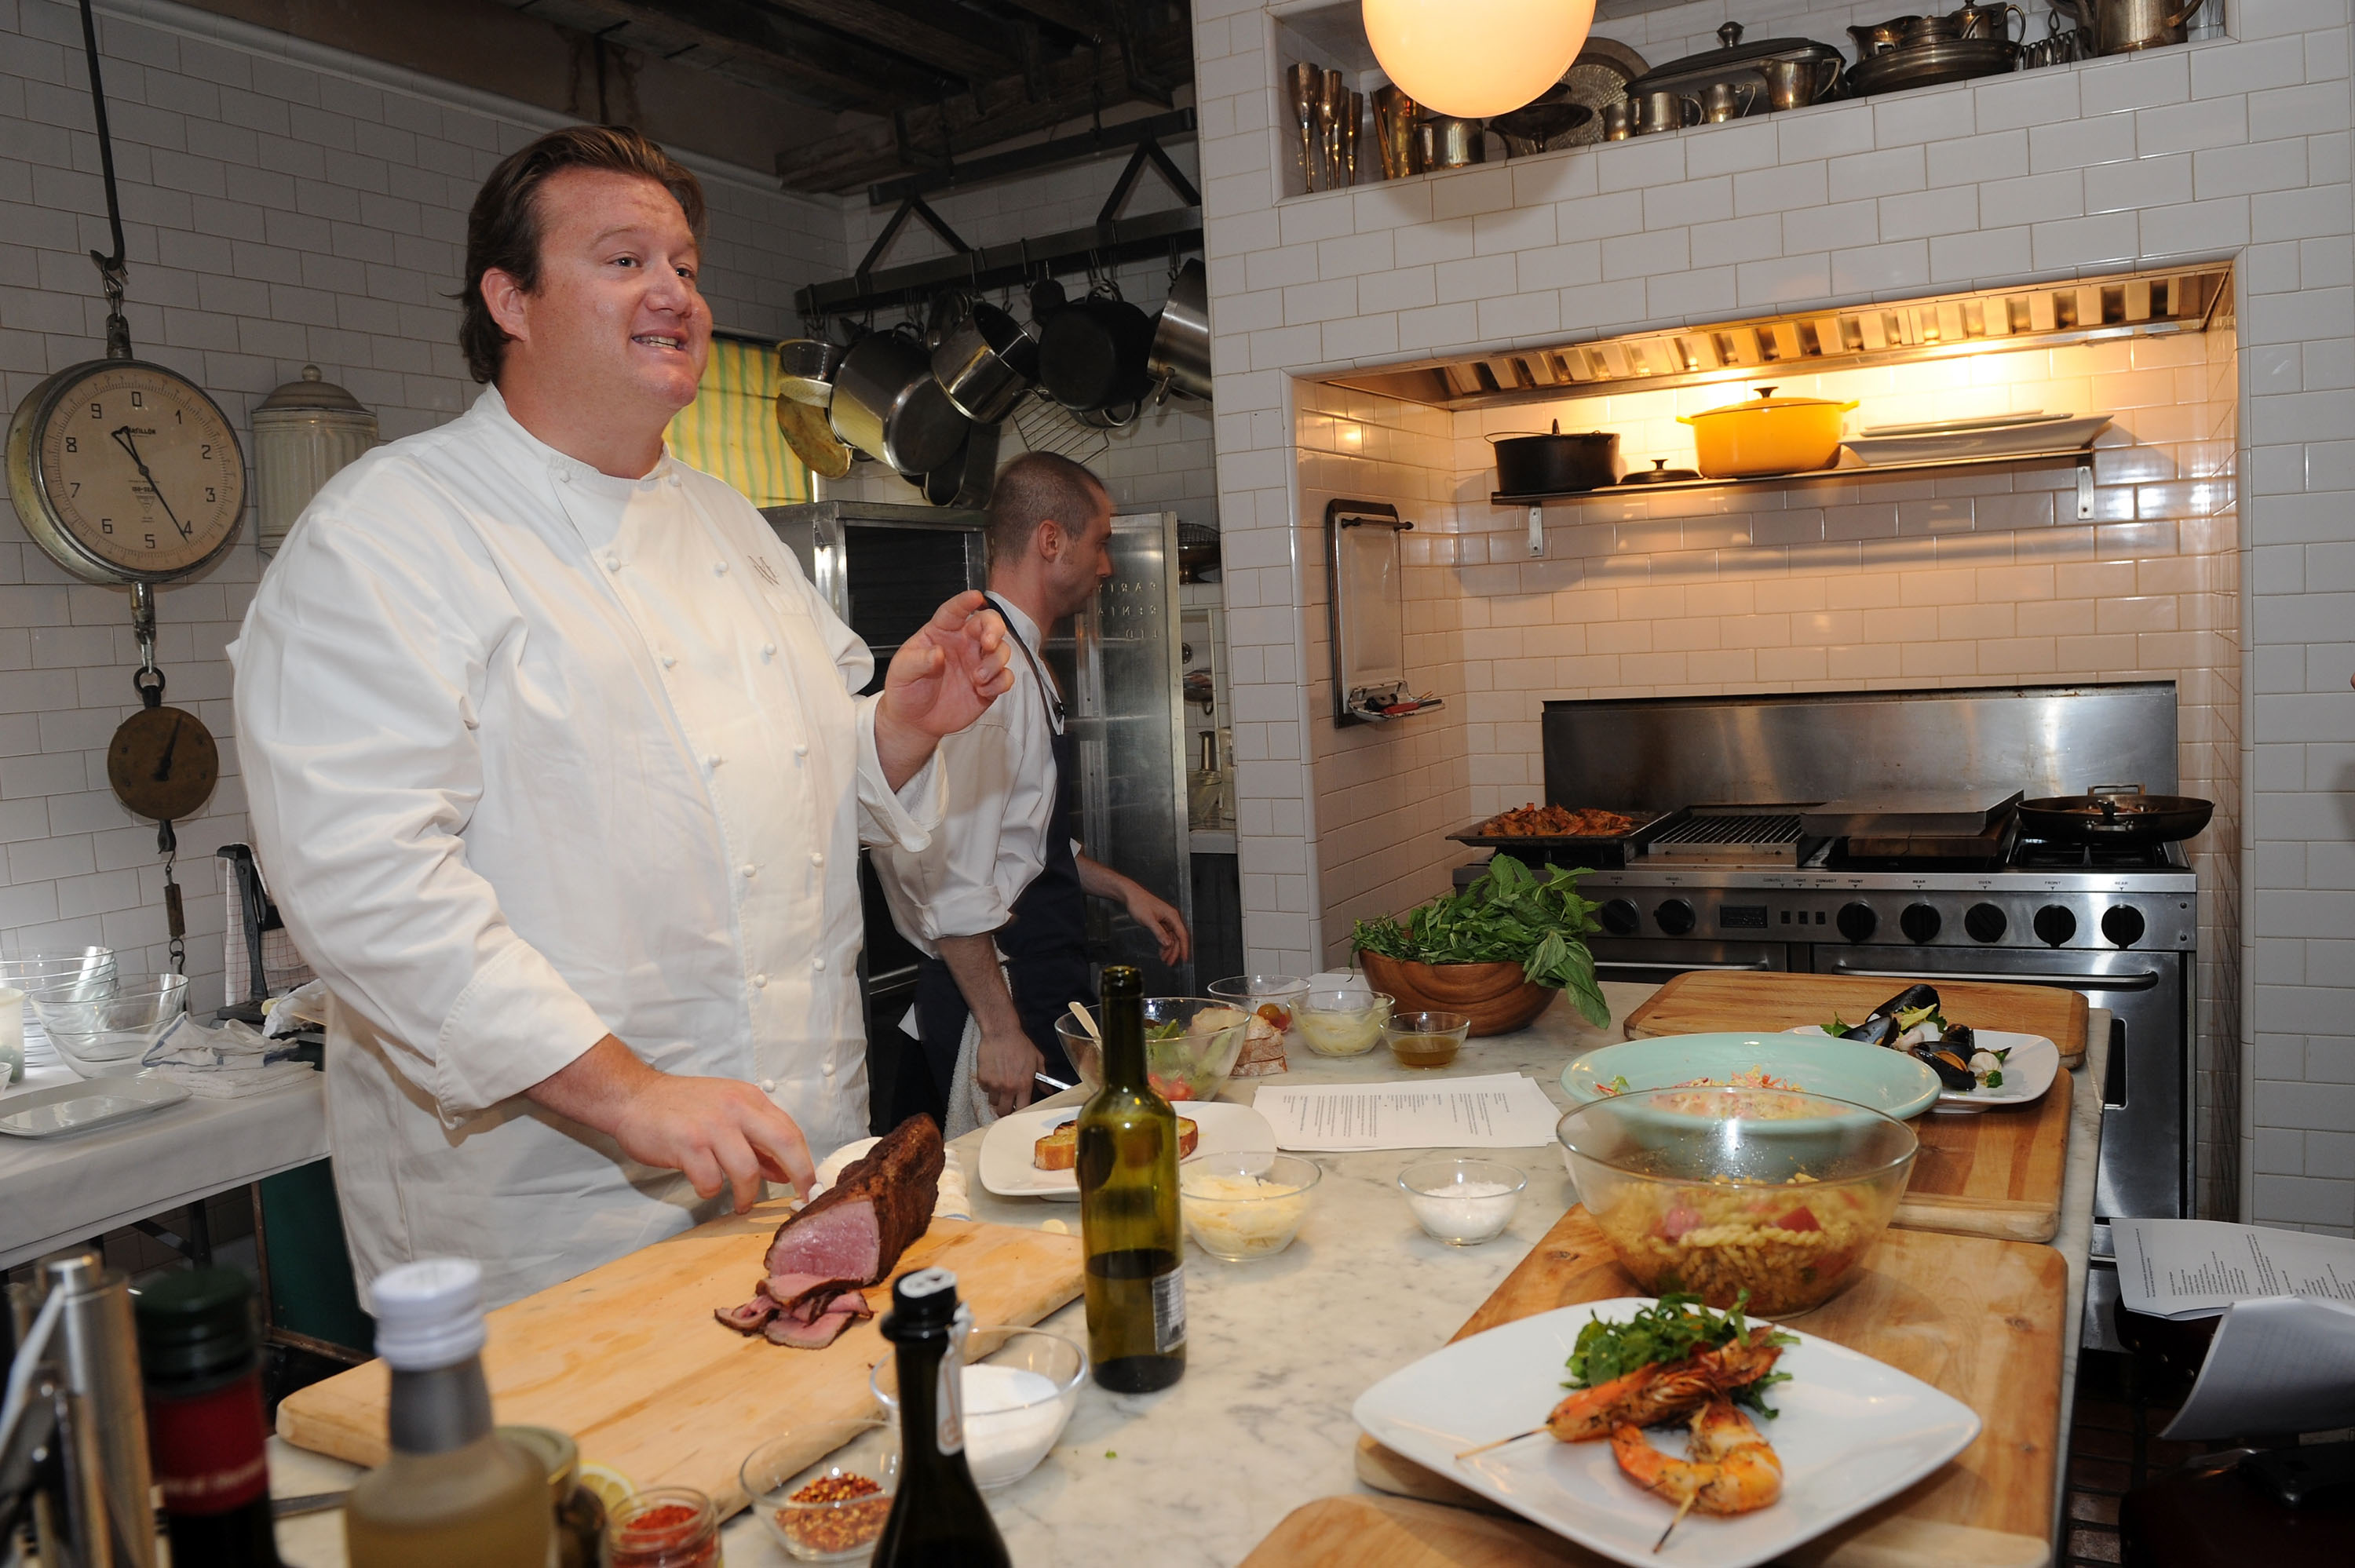  Chef Michael White (Photo by Bryan Bedder/Getty Images for Mercedes-Benz) 